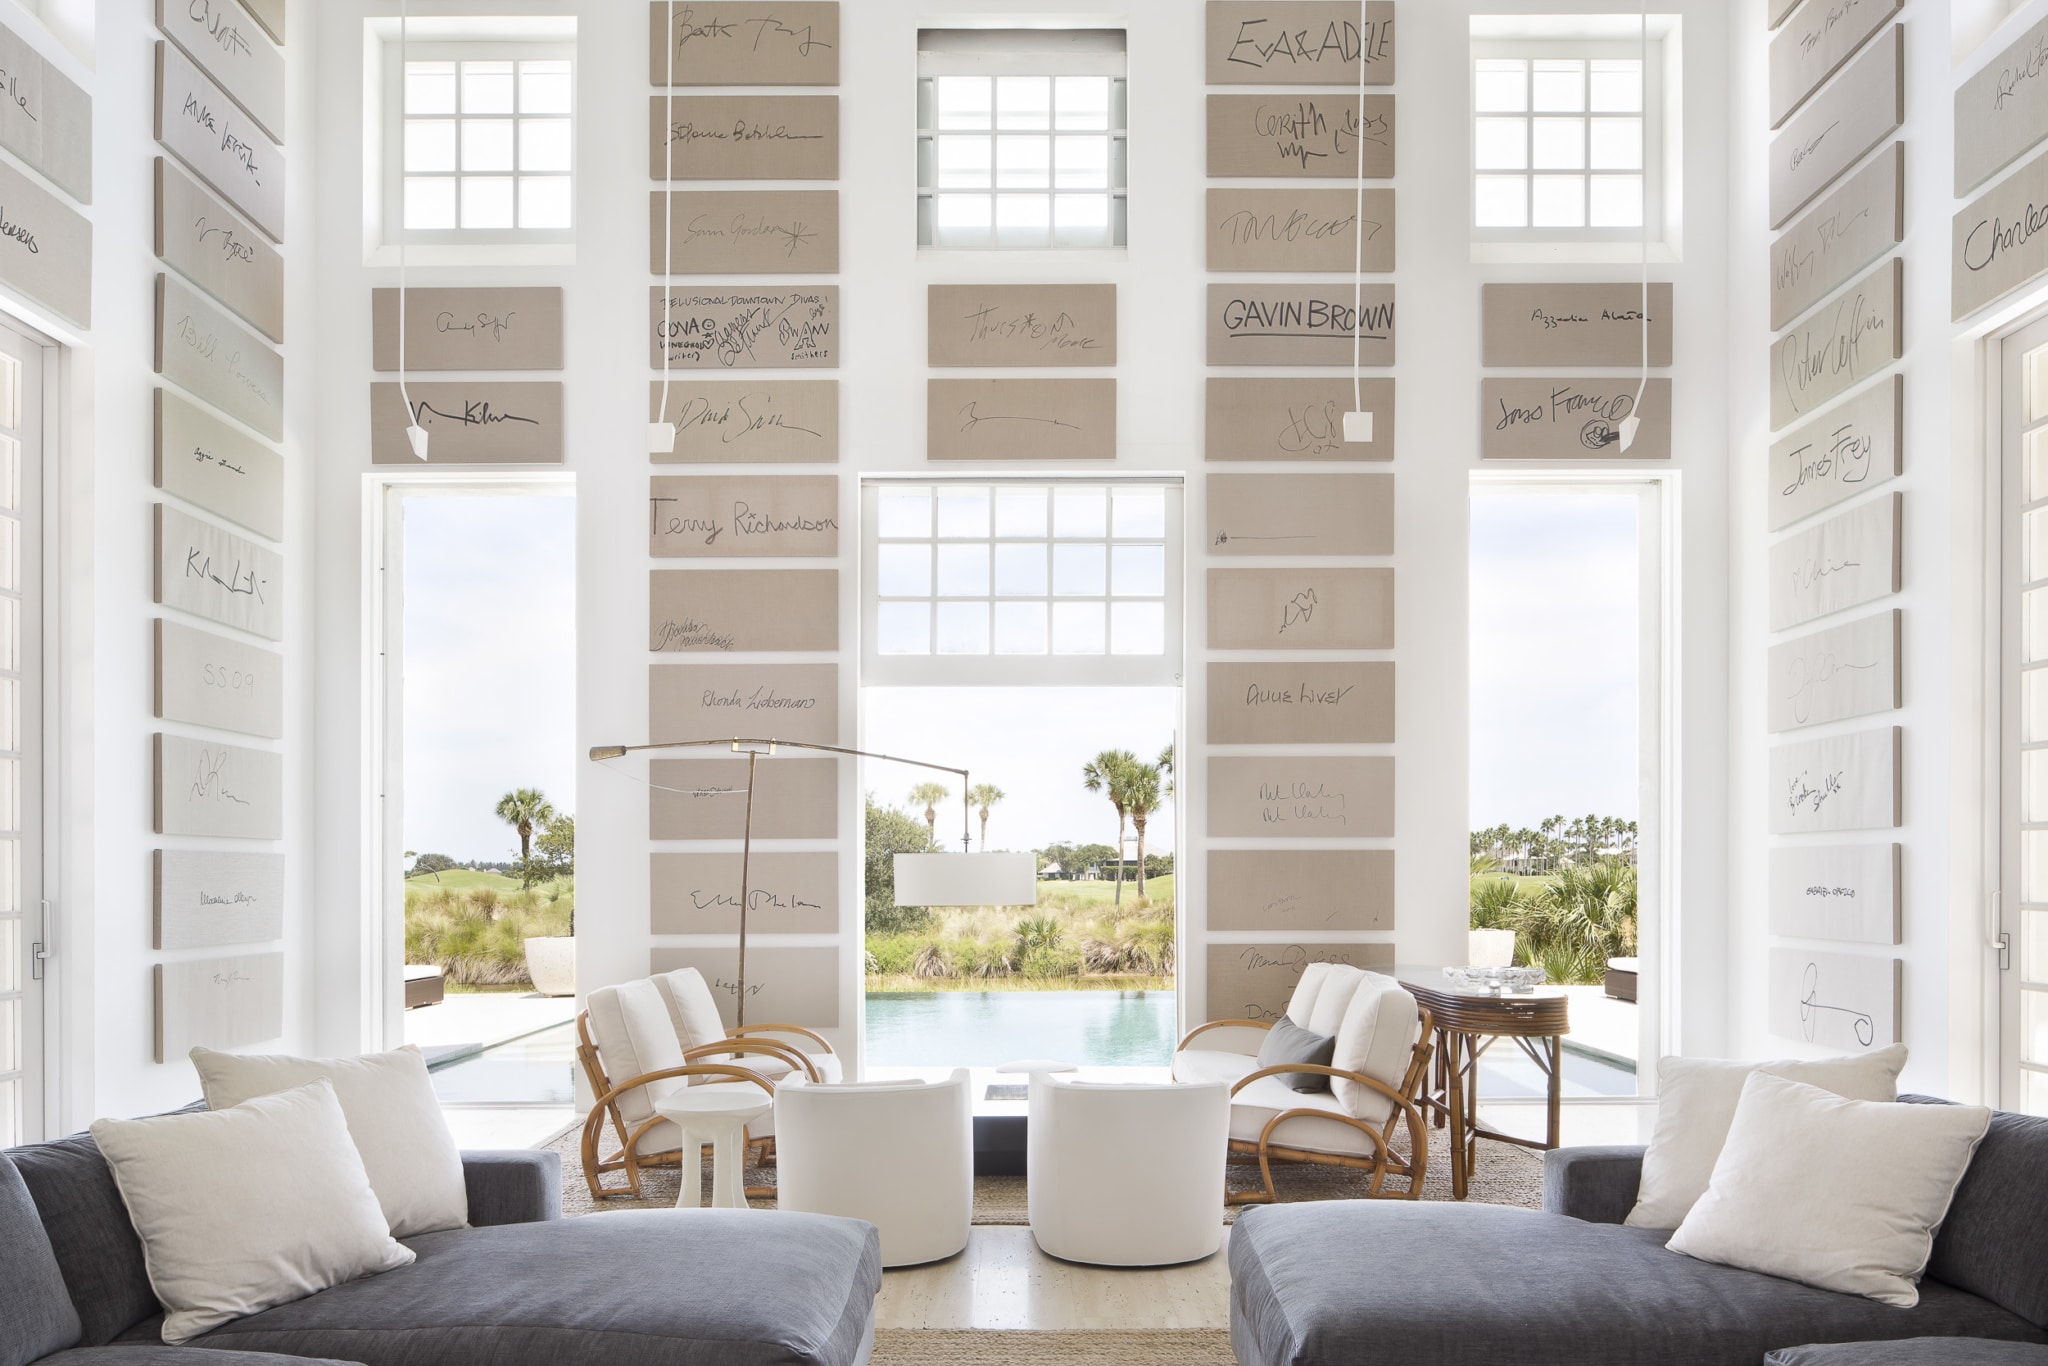 The architecture and design of Windsor a Vero Beach community - beachside - Jessica Glynn Photography - Hadley Keller Author - Vendome press - living room in blue and white